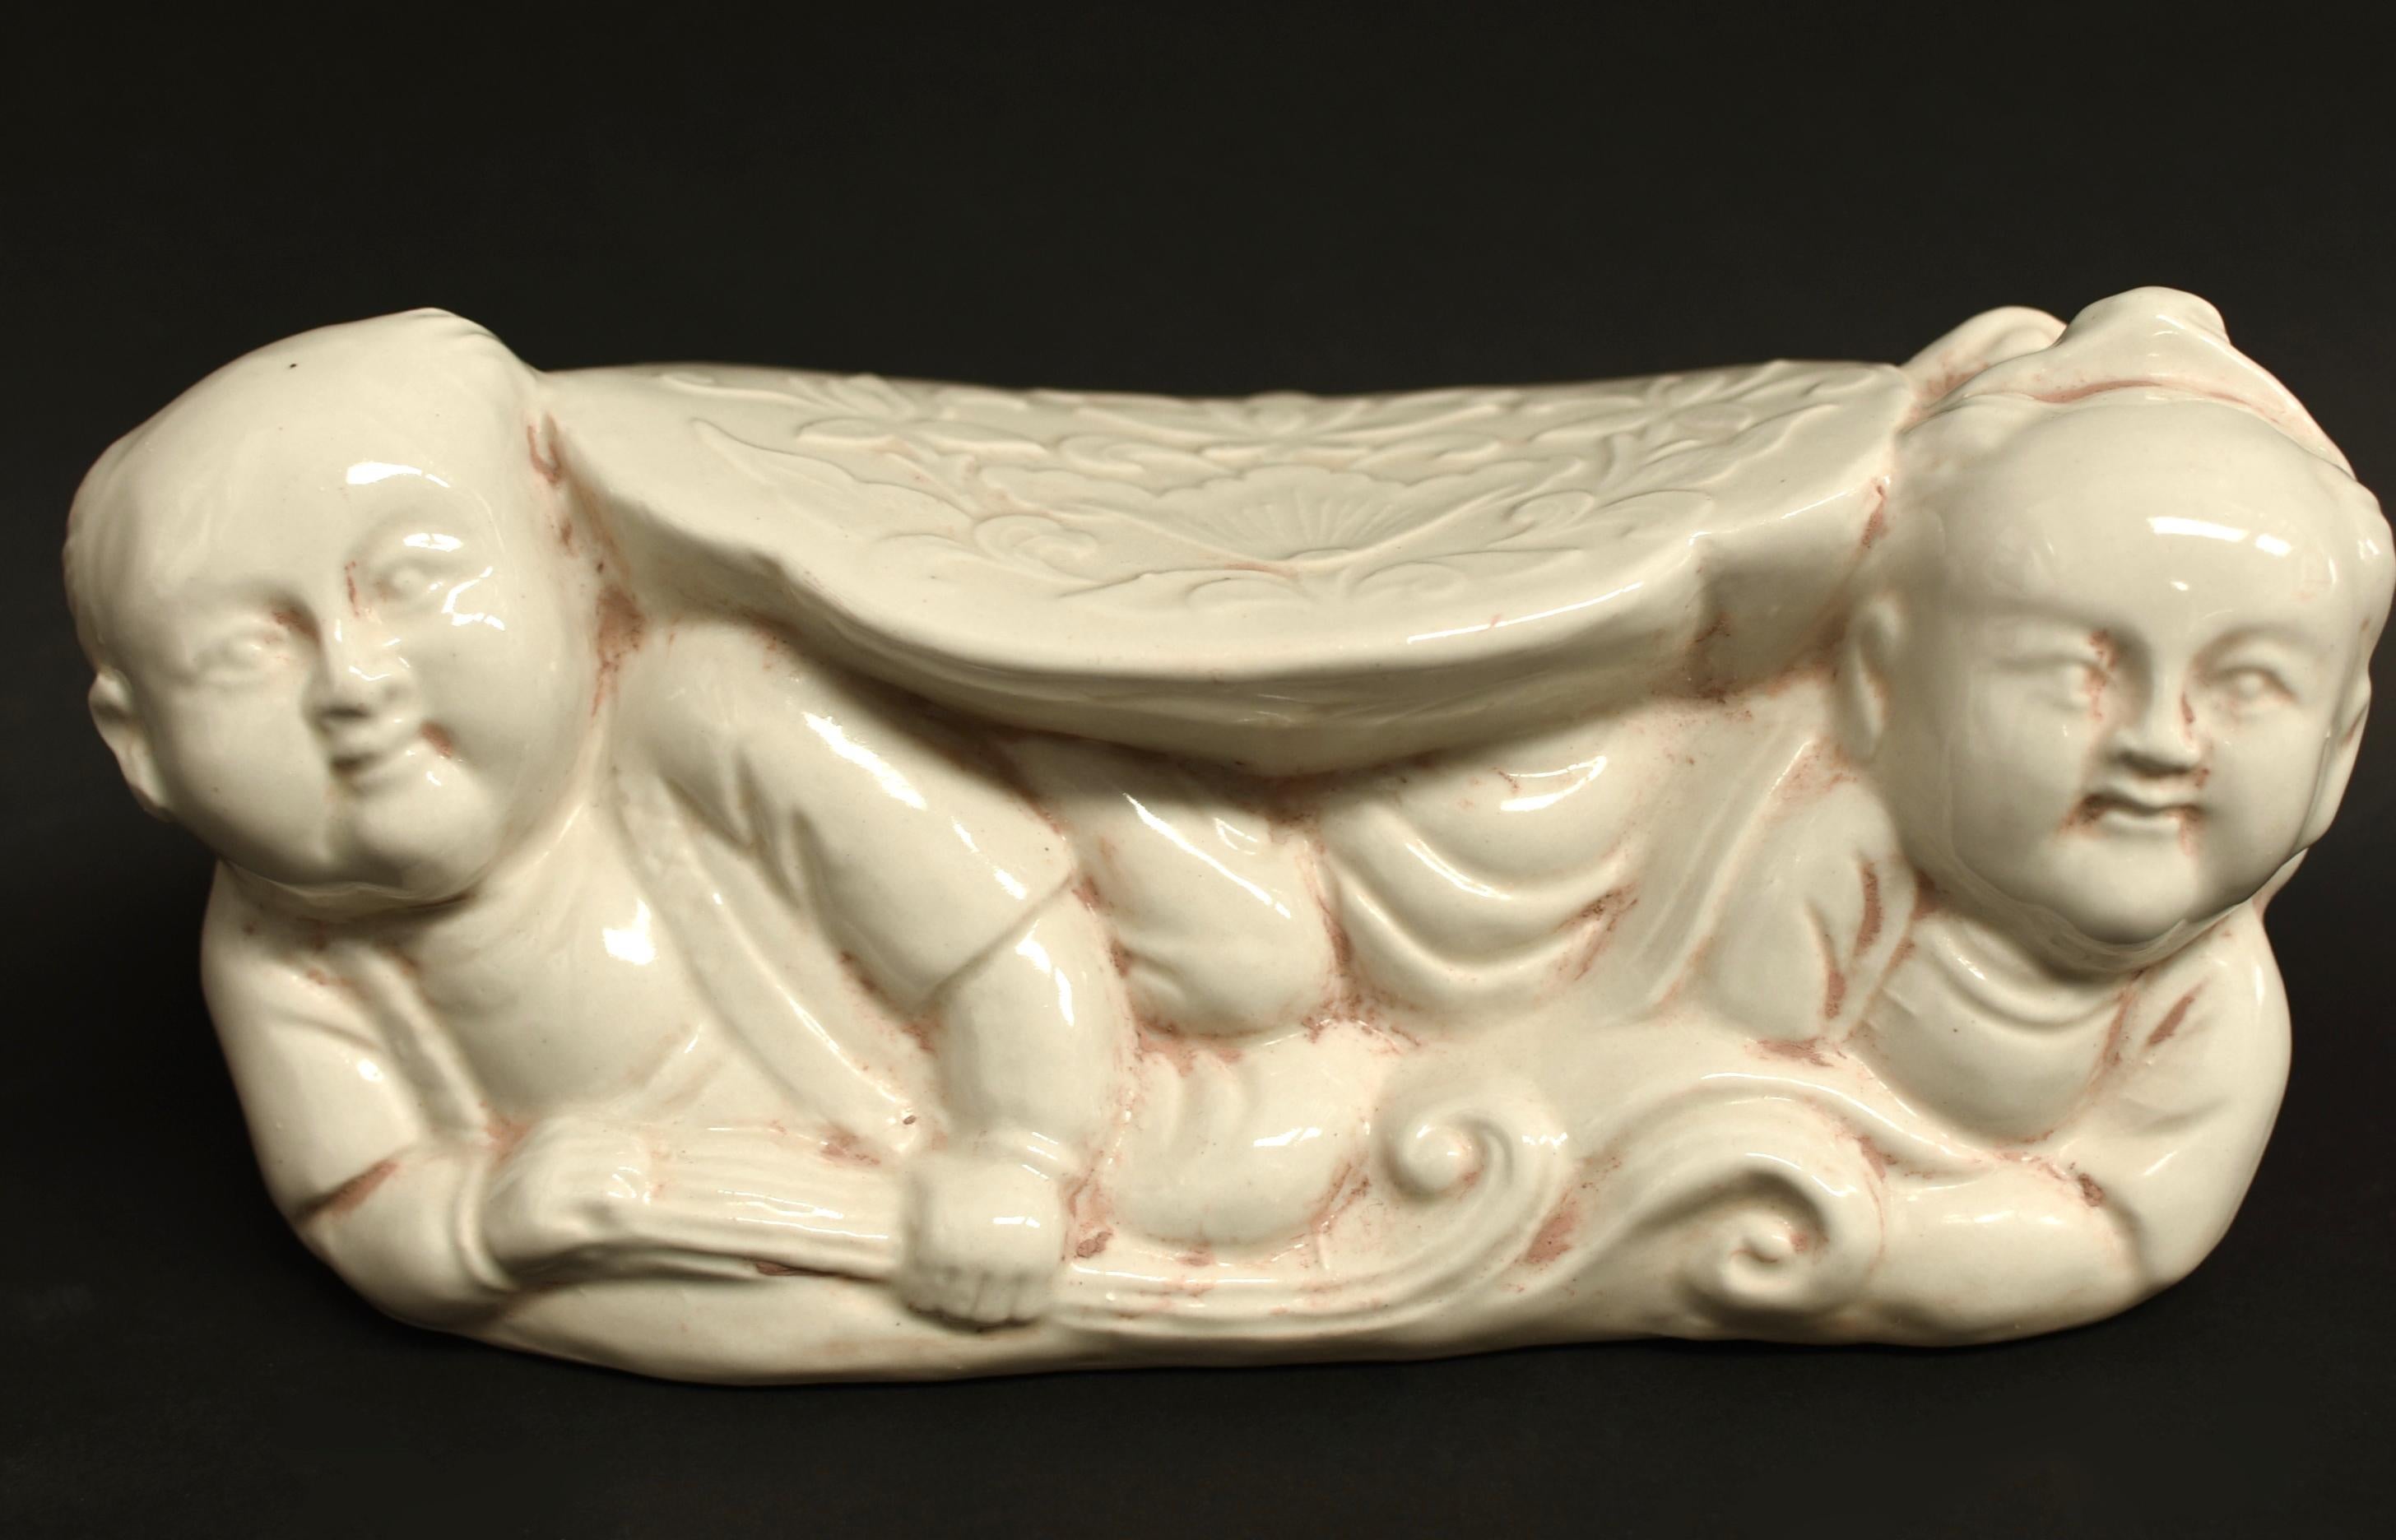 A song dynasty style ceramic pillow of the Ding kiln. The Ding kiln is one of the most important Song dynasty kilns. It produces milky white or beige glazed pieces that are favored for their simplicity and country grace. A pair of cherub boys raise